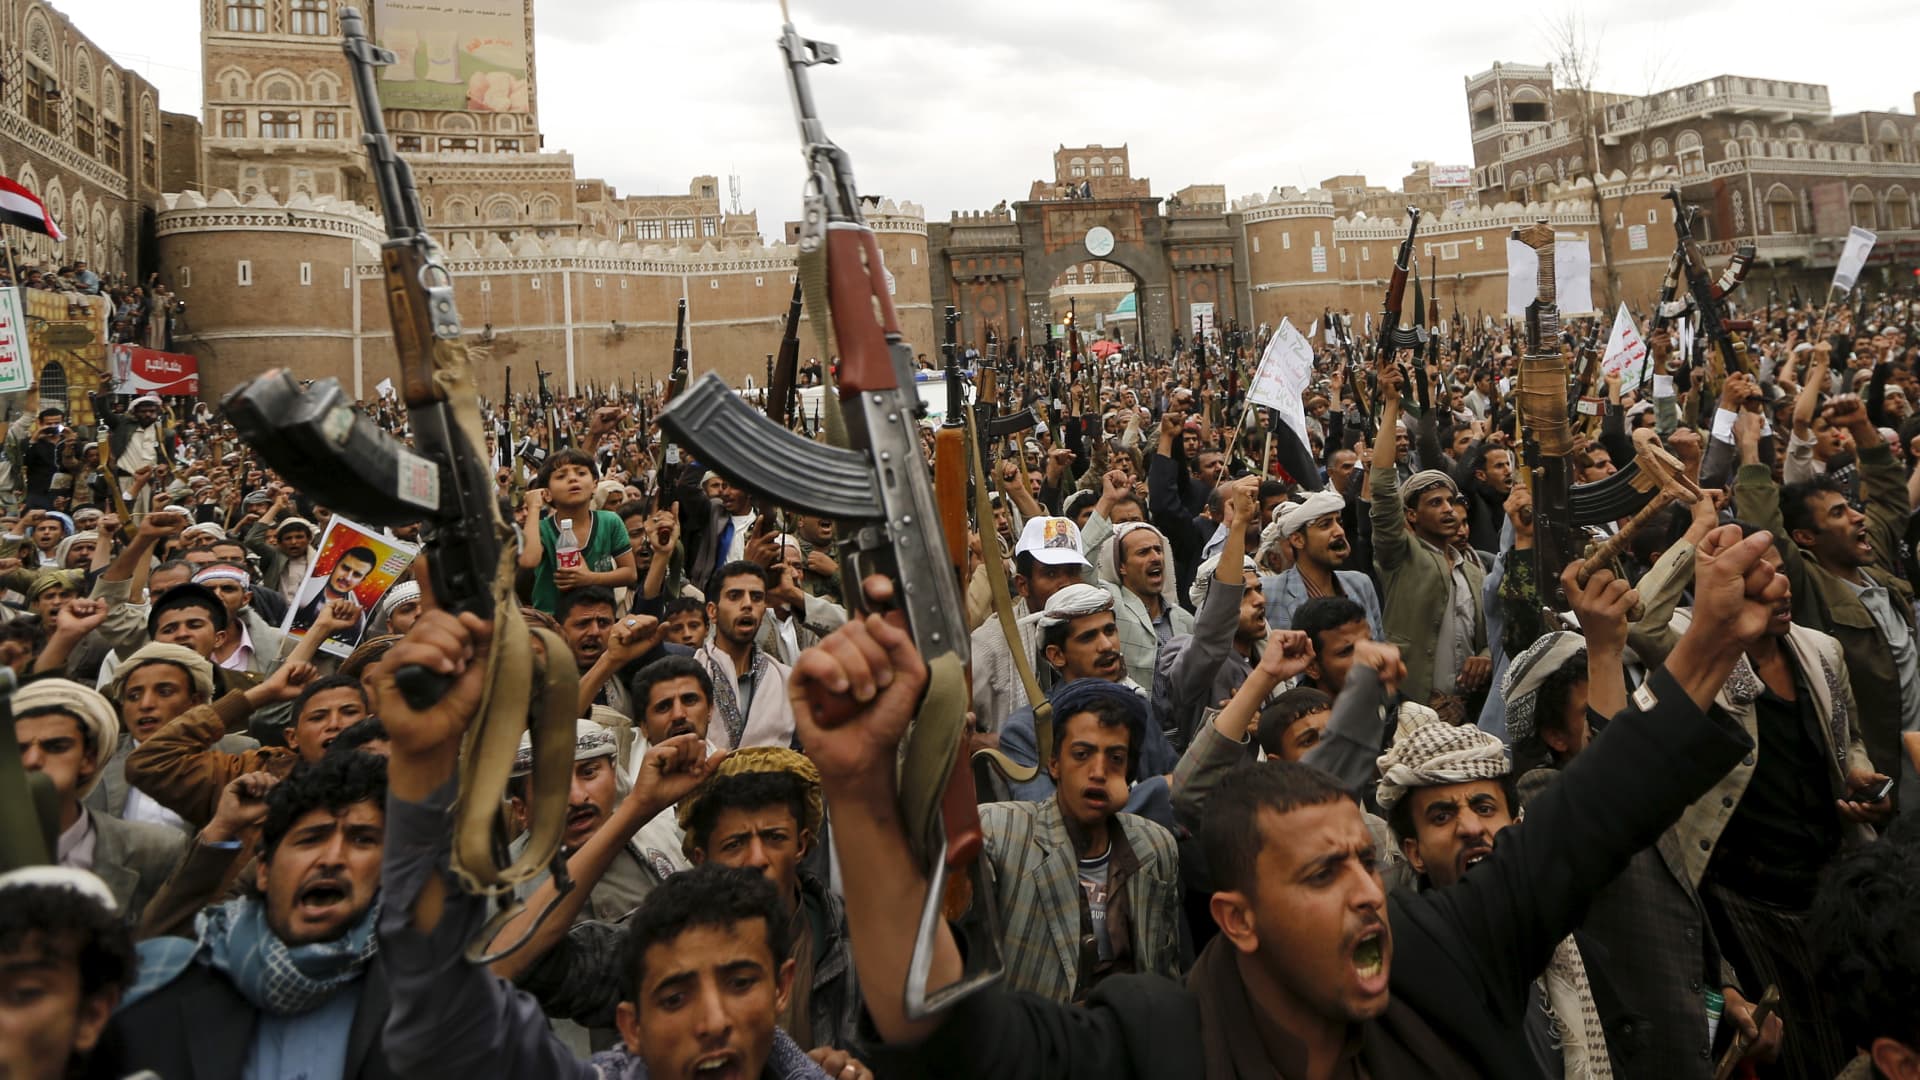 Shi'ite Muslim rebels hold up their weapons during a rally against air strikes in Sanaa March 26, 2015.